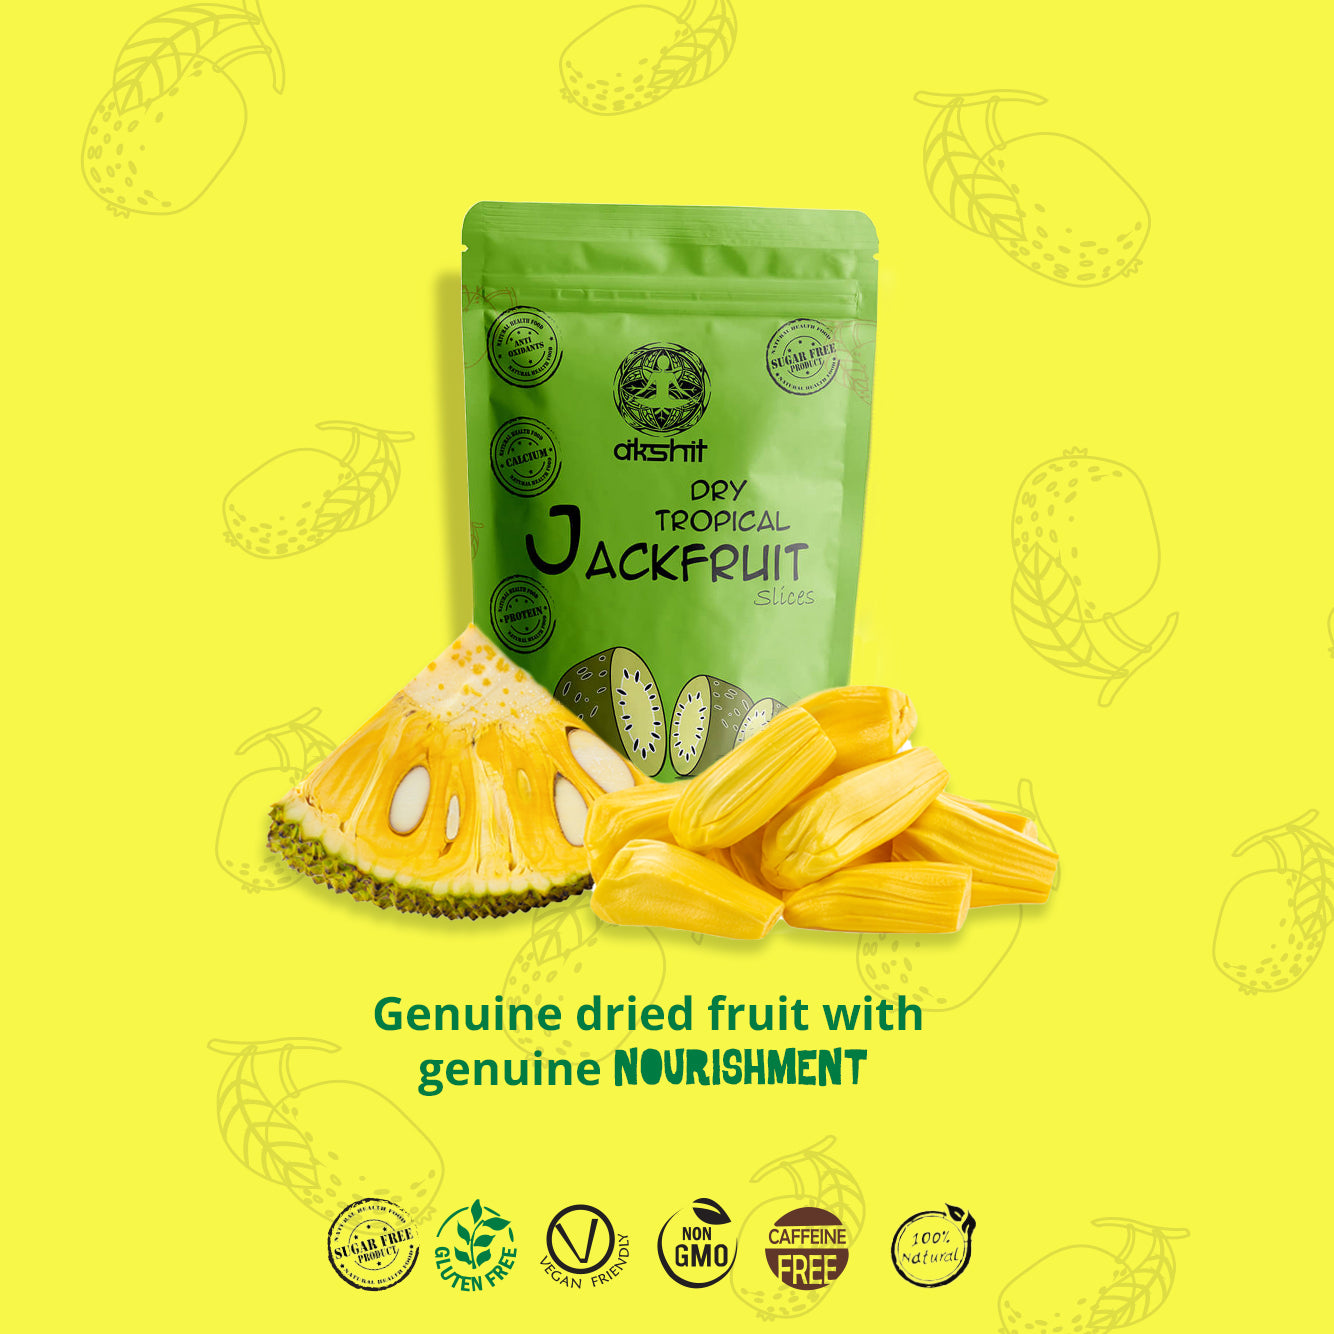 genuine dried fruit with genuine nourishment Akshit Dried Jackfruit Snack From Dried Organic Tropical Jackfruit| NON-GMO( Bulk ) - Akshar herbs and spices 